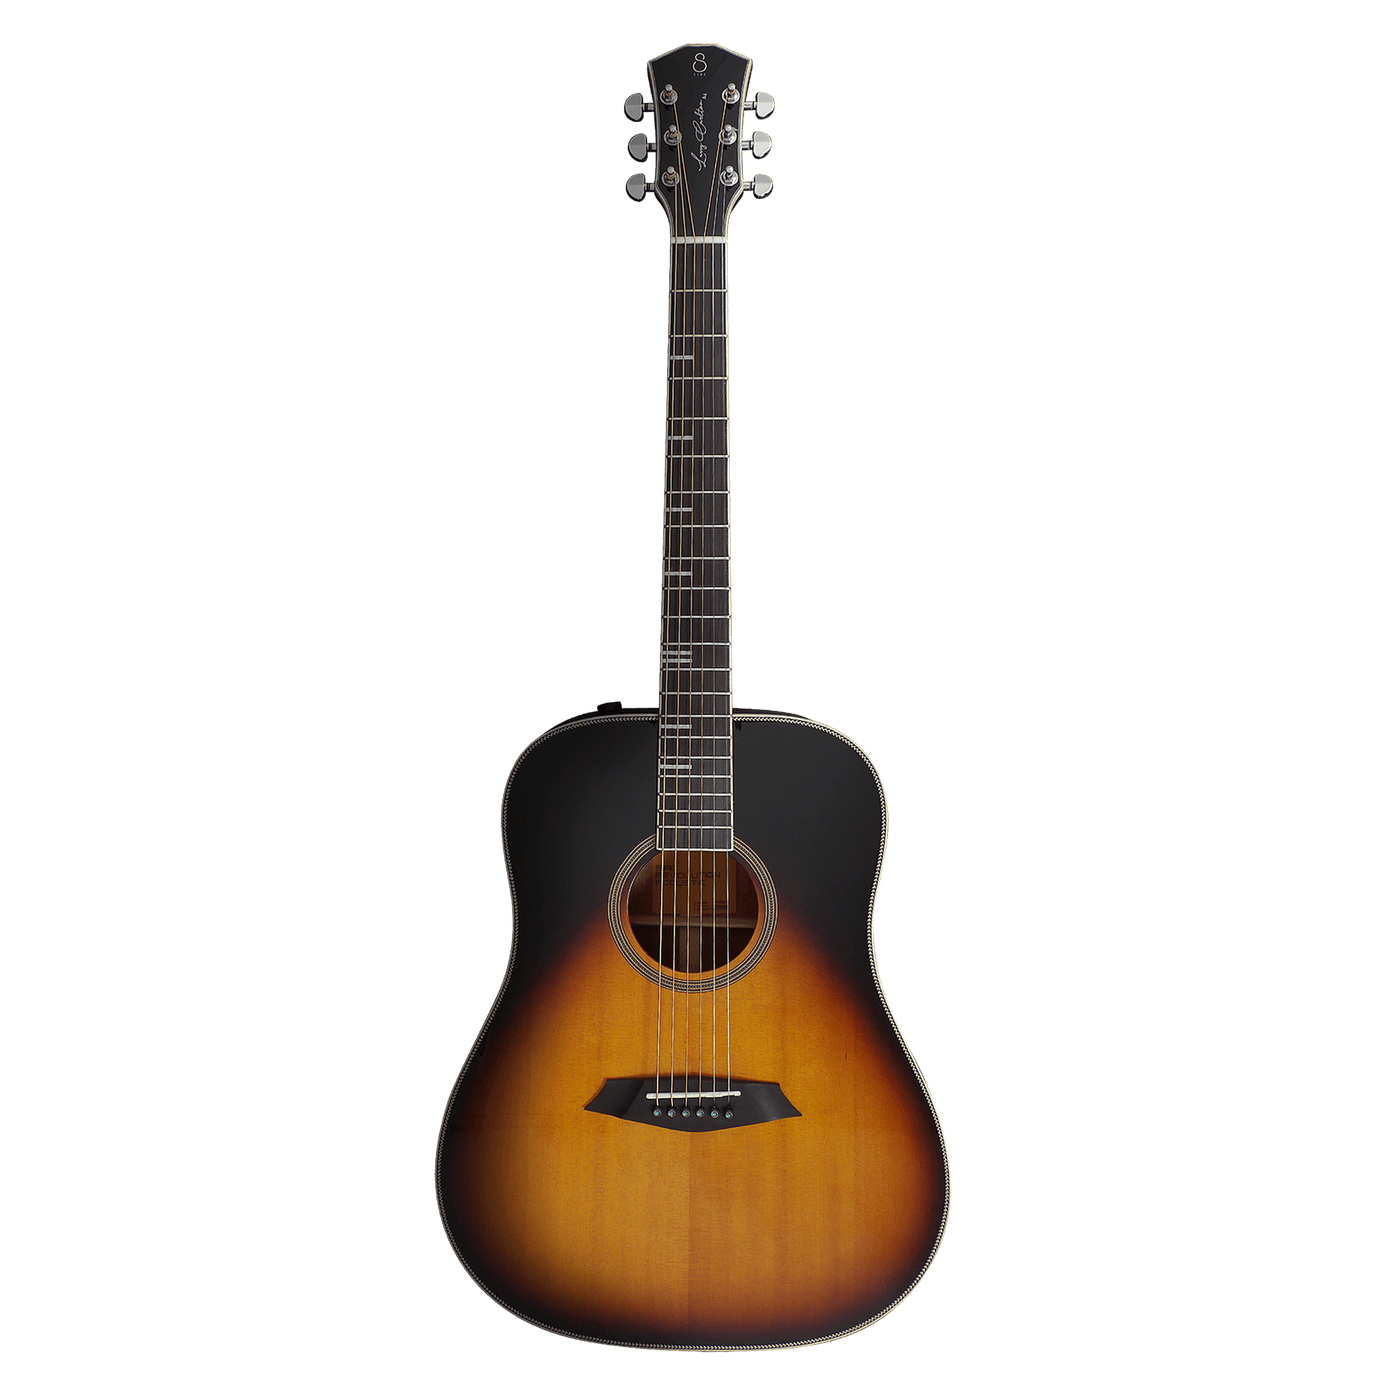 Sire A4-D Vintage Sunburst - $799990 - Gearhub - The upgraded Sire acoustic guitar is brimming with design and features meeting the quality standard of Larry Carlton. The A4 has two body shapes - Dreadnought and Grand Auditorium. More than the comfort from the rolled fretboard edges, the added solid Mahogany back plate makes the acoustic guitar more worth than its value. Cuerpo • Modelo: Larry Carlton A4-D (Dreadnought)• Top: Roasted Solid Spruce• Sides: Mahogany• Top: Solid Mahogany • Terminación: Polyuret